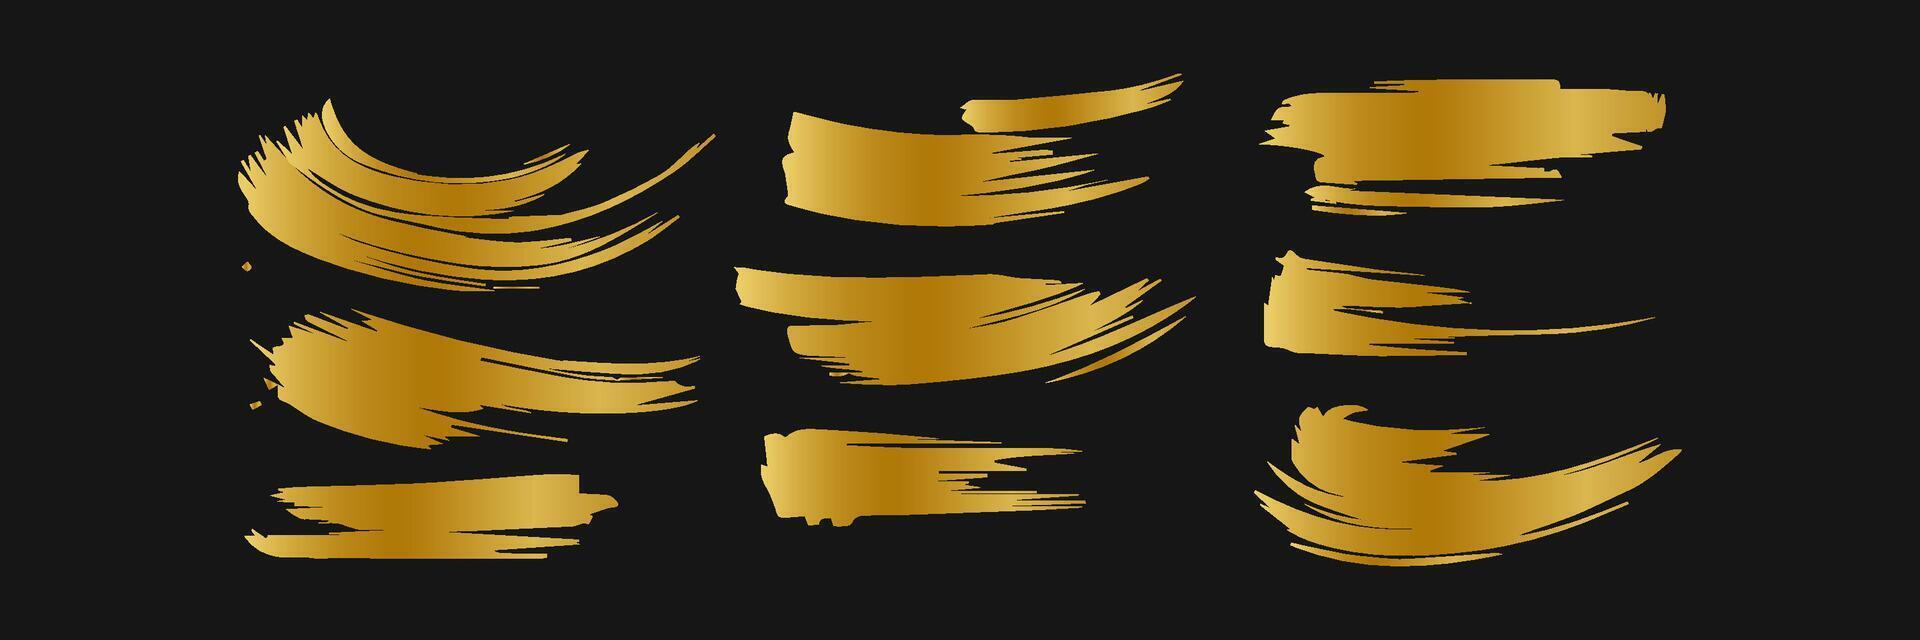 Collection of golden paint strokes to make a background for your design, golden hot foil, gold leaf vector